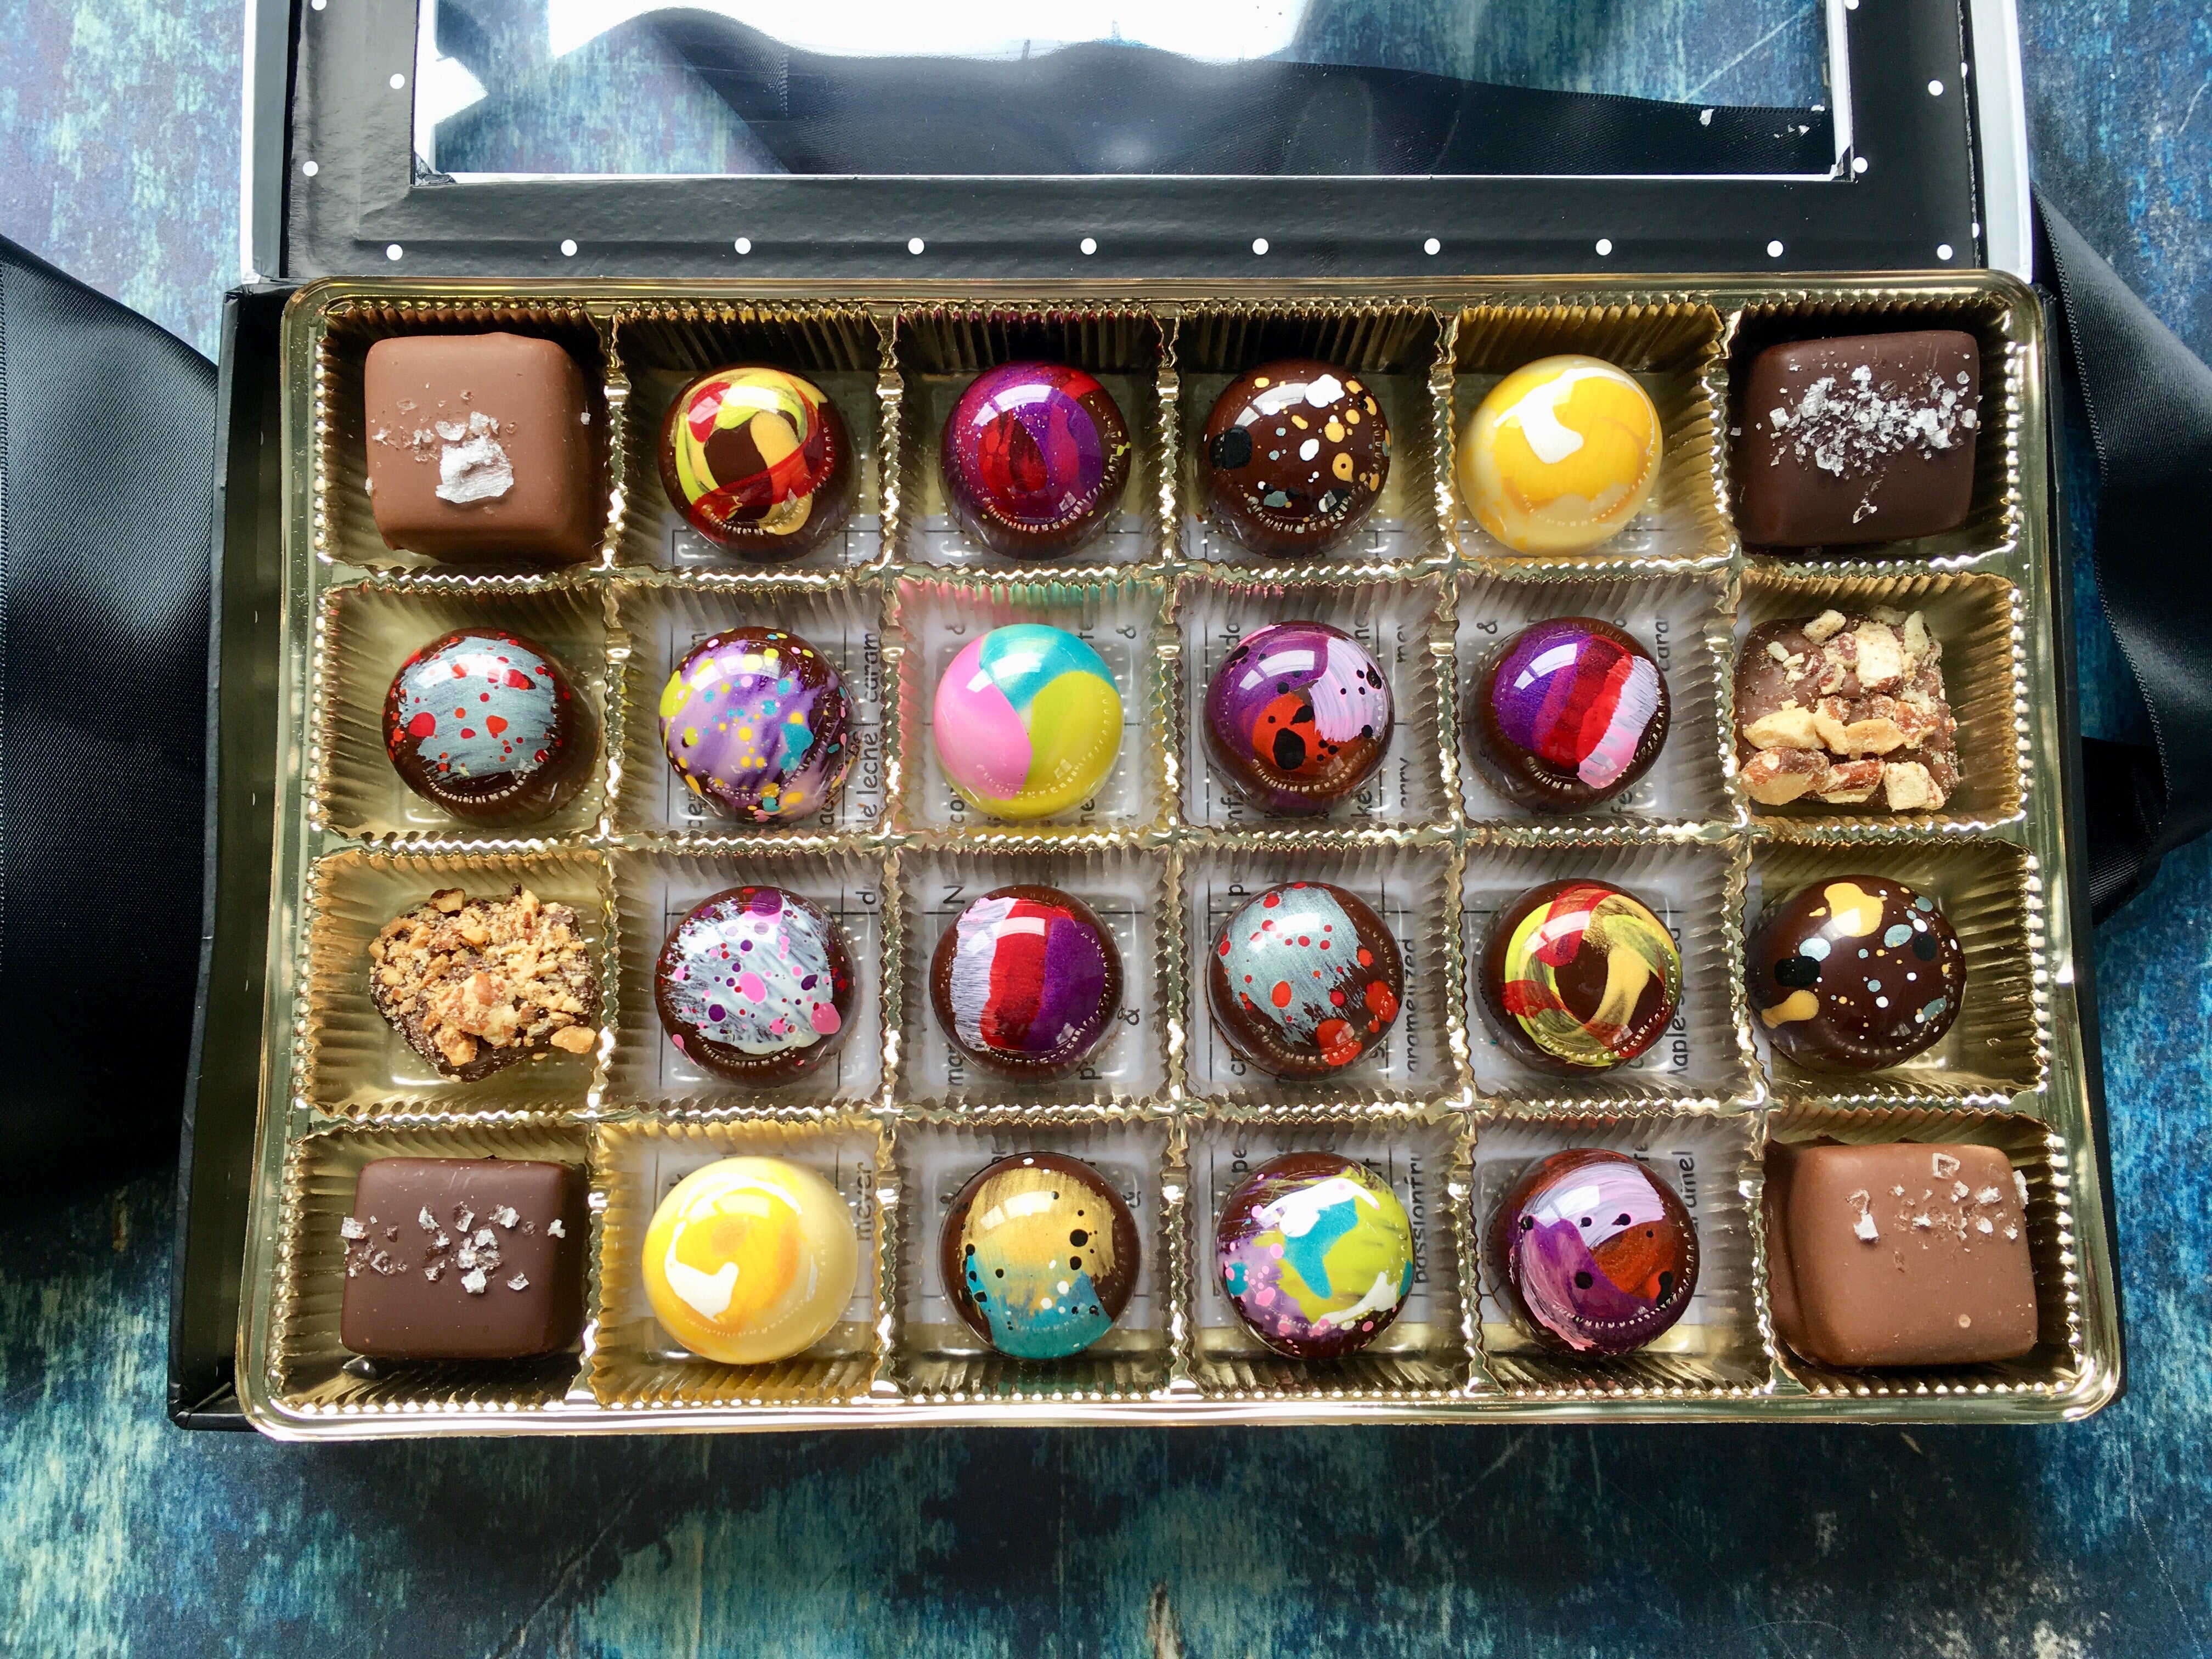 24 Piece Chocolate Assortment Box - Bonbons, Caramels, and Toffee